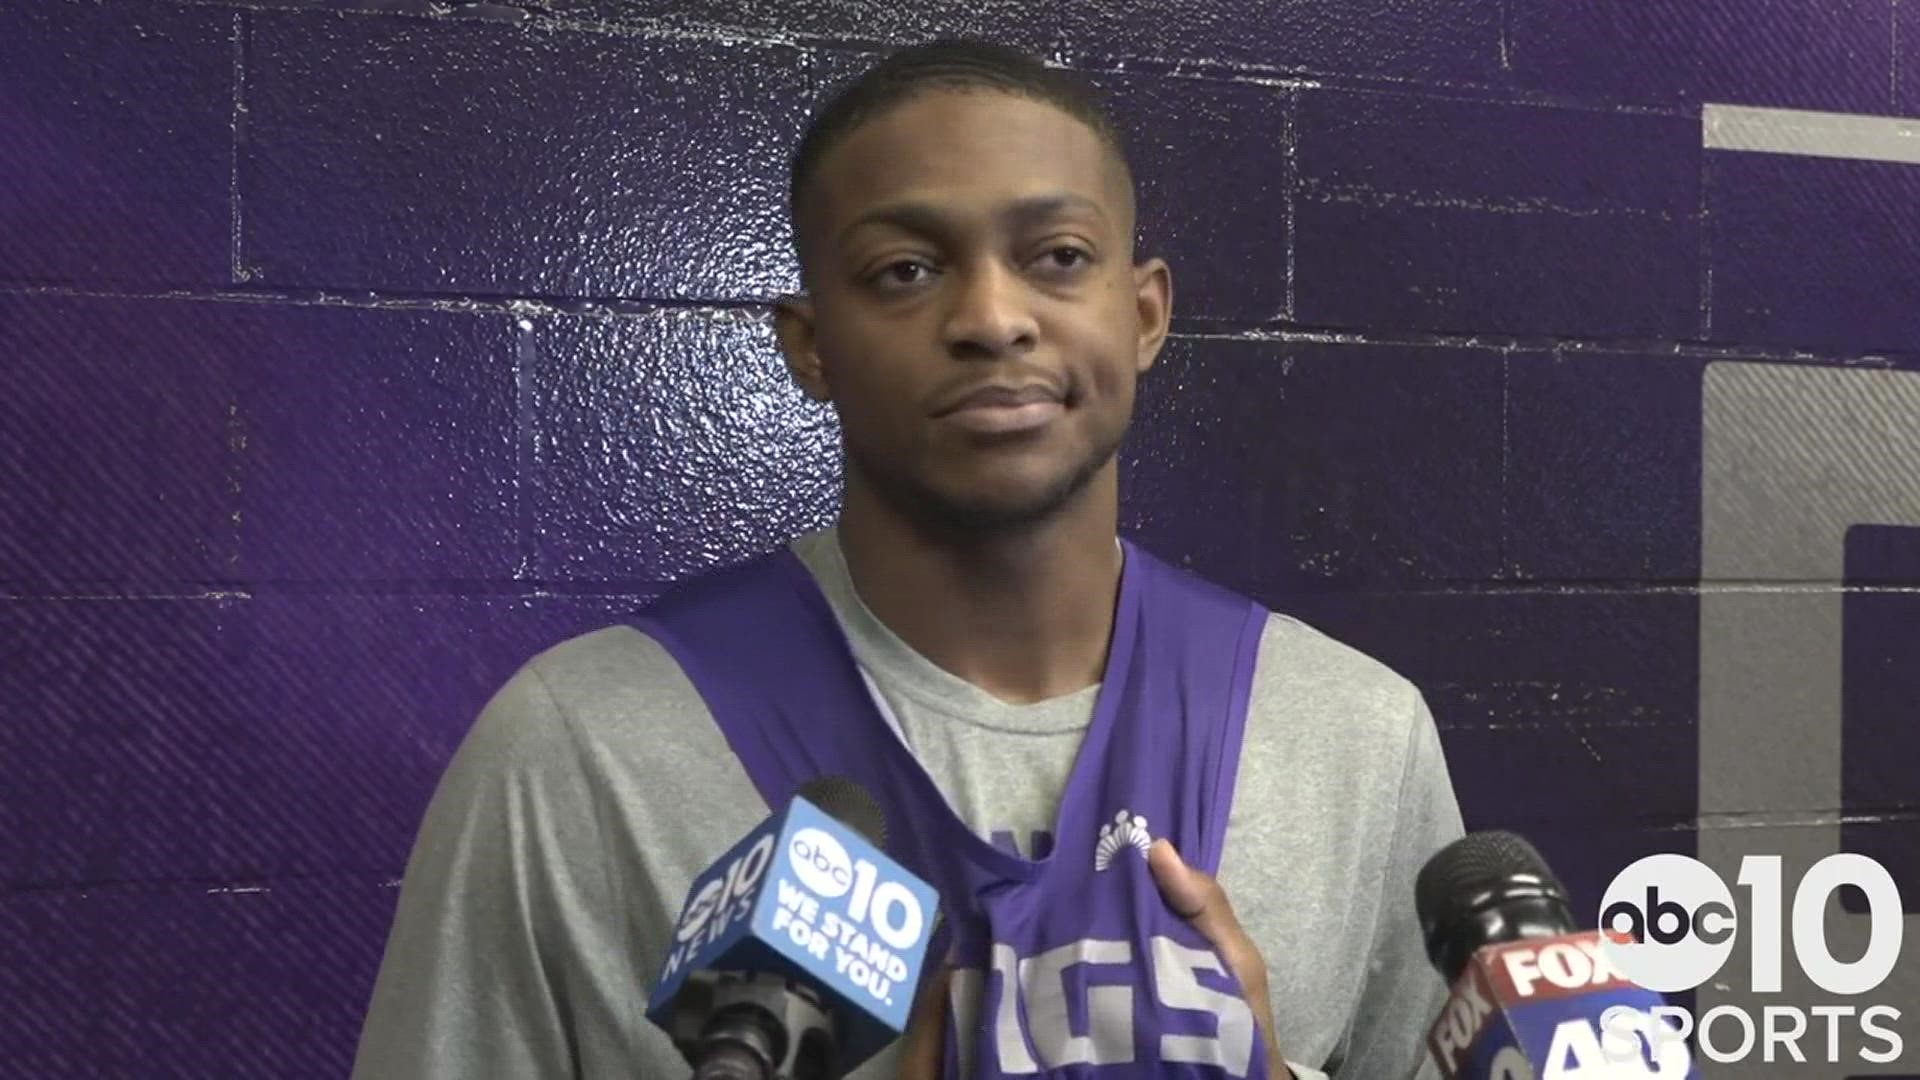 Kings PG De'Aaron Fox reacts to the firing of head coach Luke Walton and discusses the changes he expects from his team under interim coach Alvin Gentry.